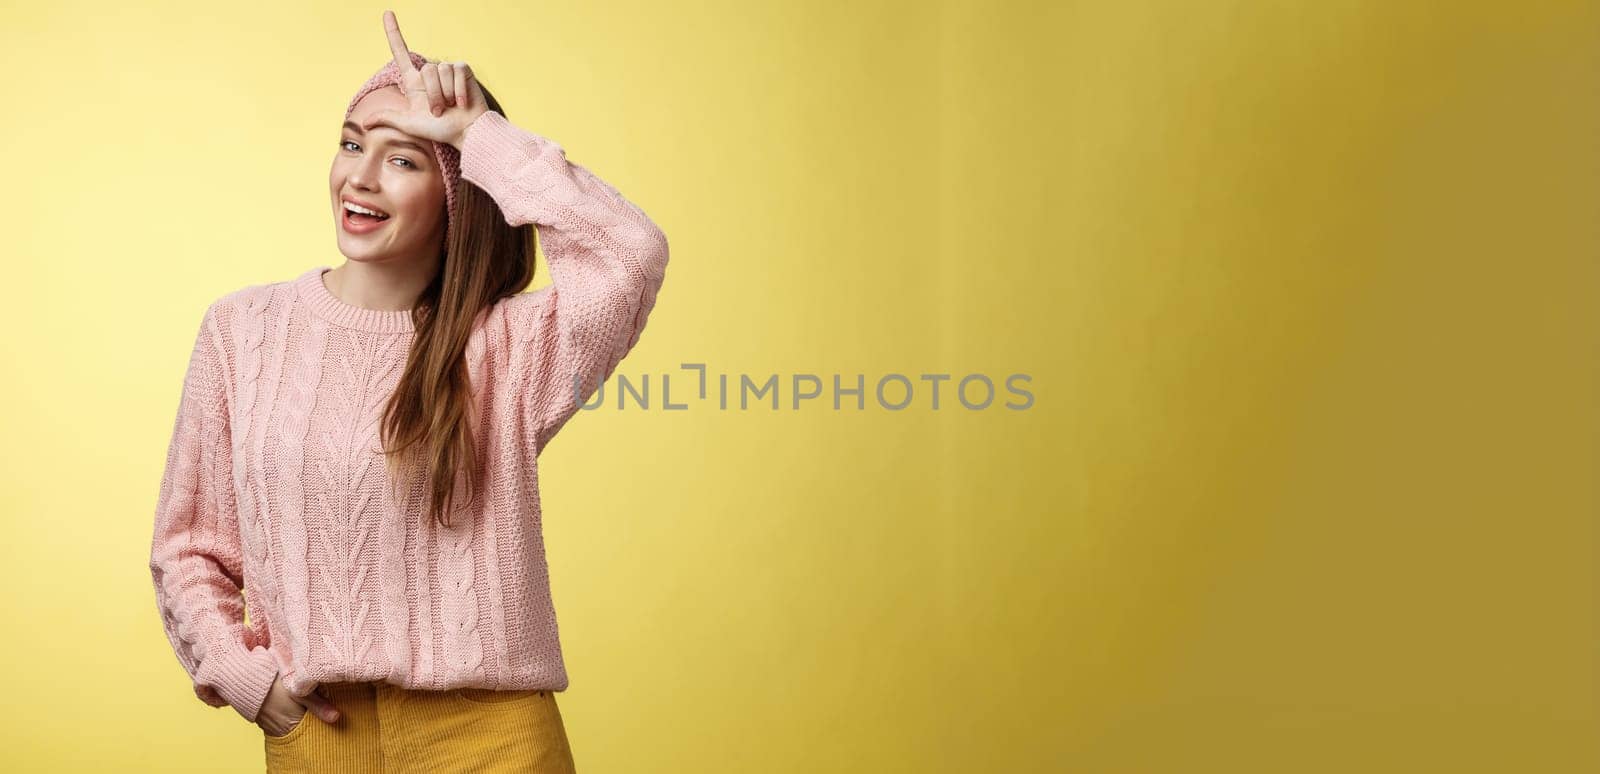 Attractive triumphing arrogant and confident cute glamourous woman in knitted sweater, headband showing l letter on forehead, loser sign and laughing over lost team, mocking having fun. Copy space